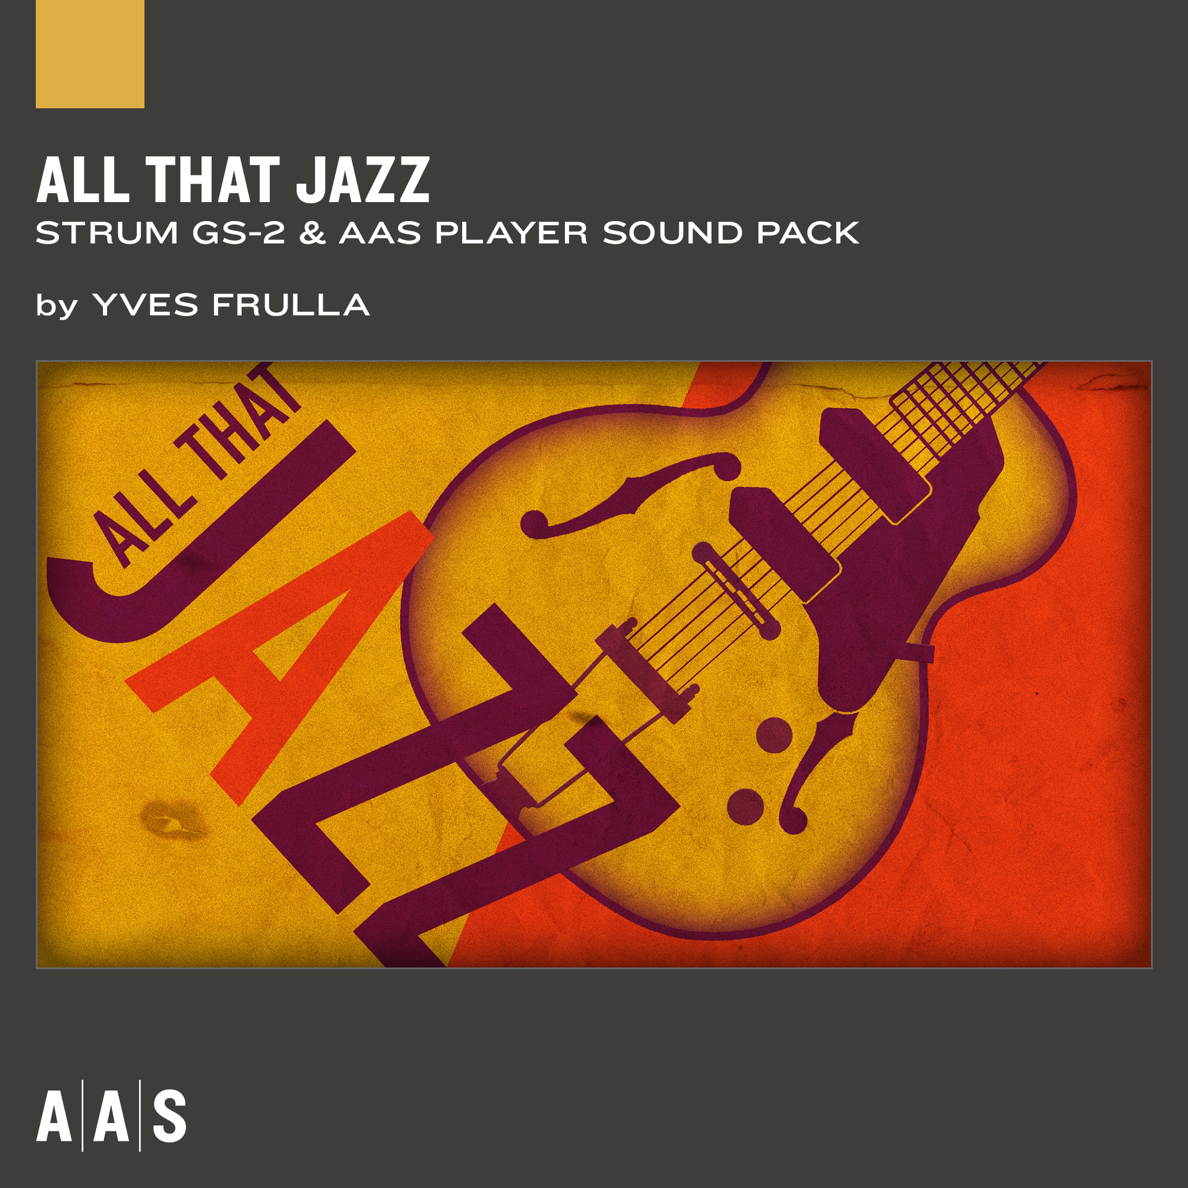 Strum and AAS Player sound pack ： All That Jazz